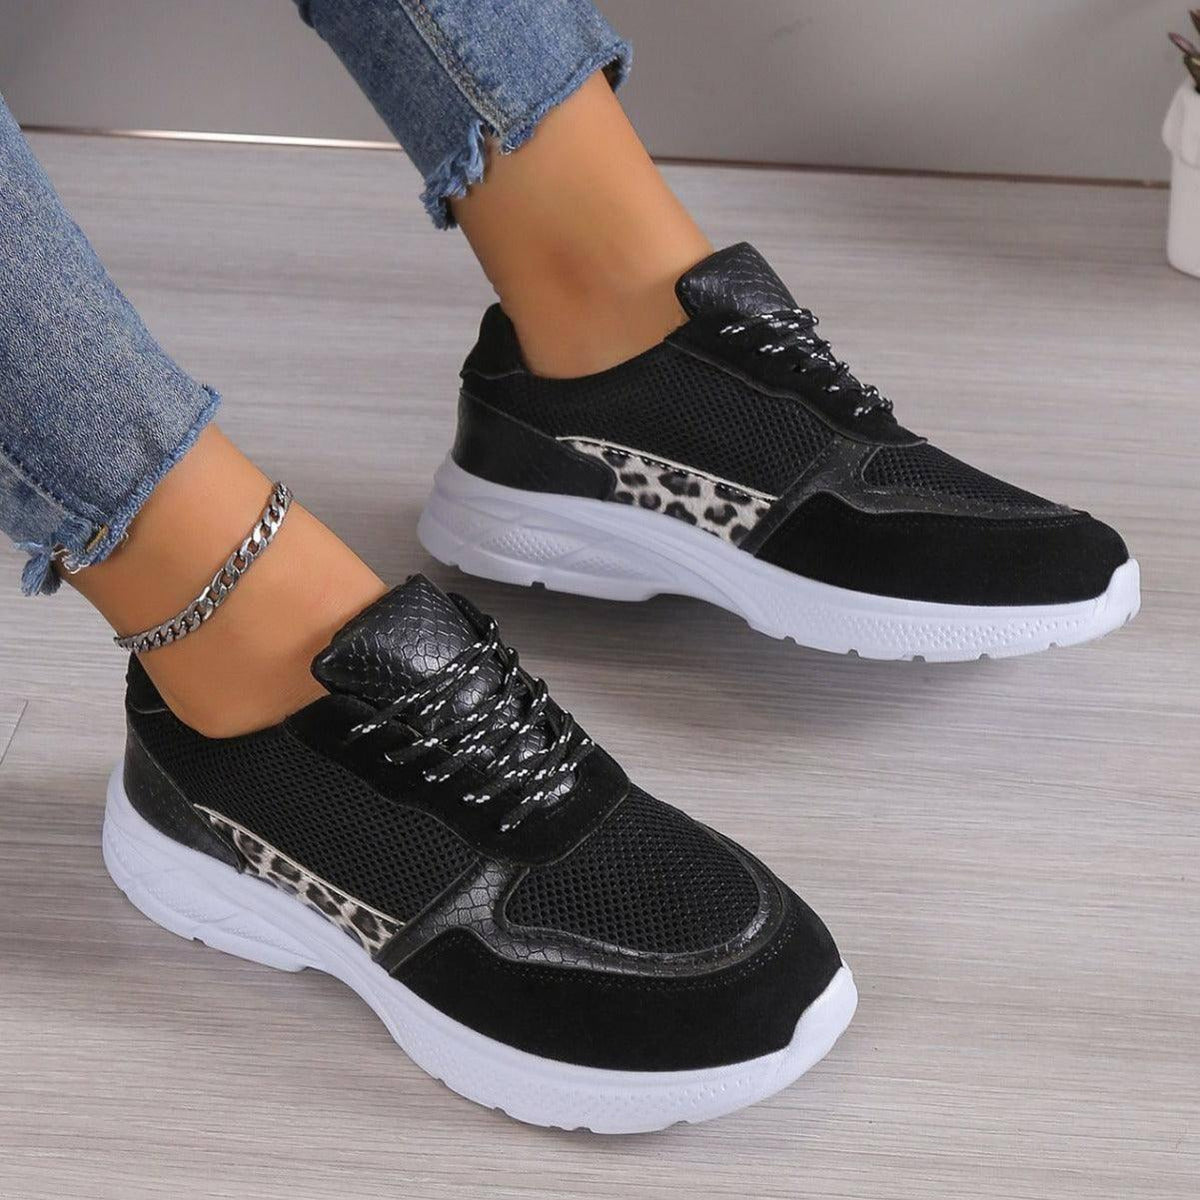 Women's Lace Up Sneakers Breathable Mesh Flat Shoes Fashion-Black-4